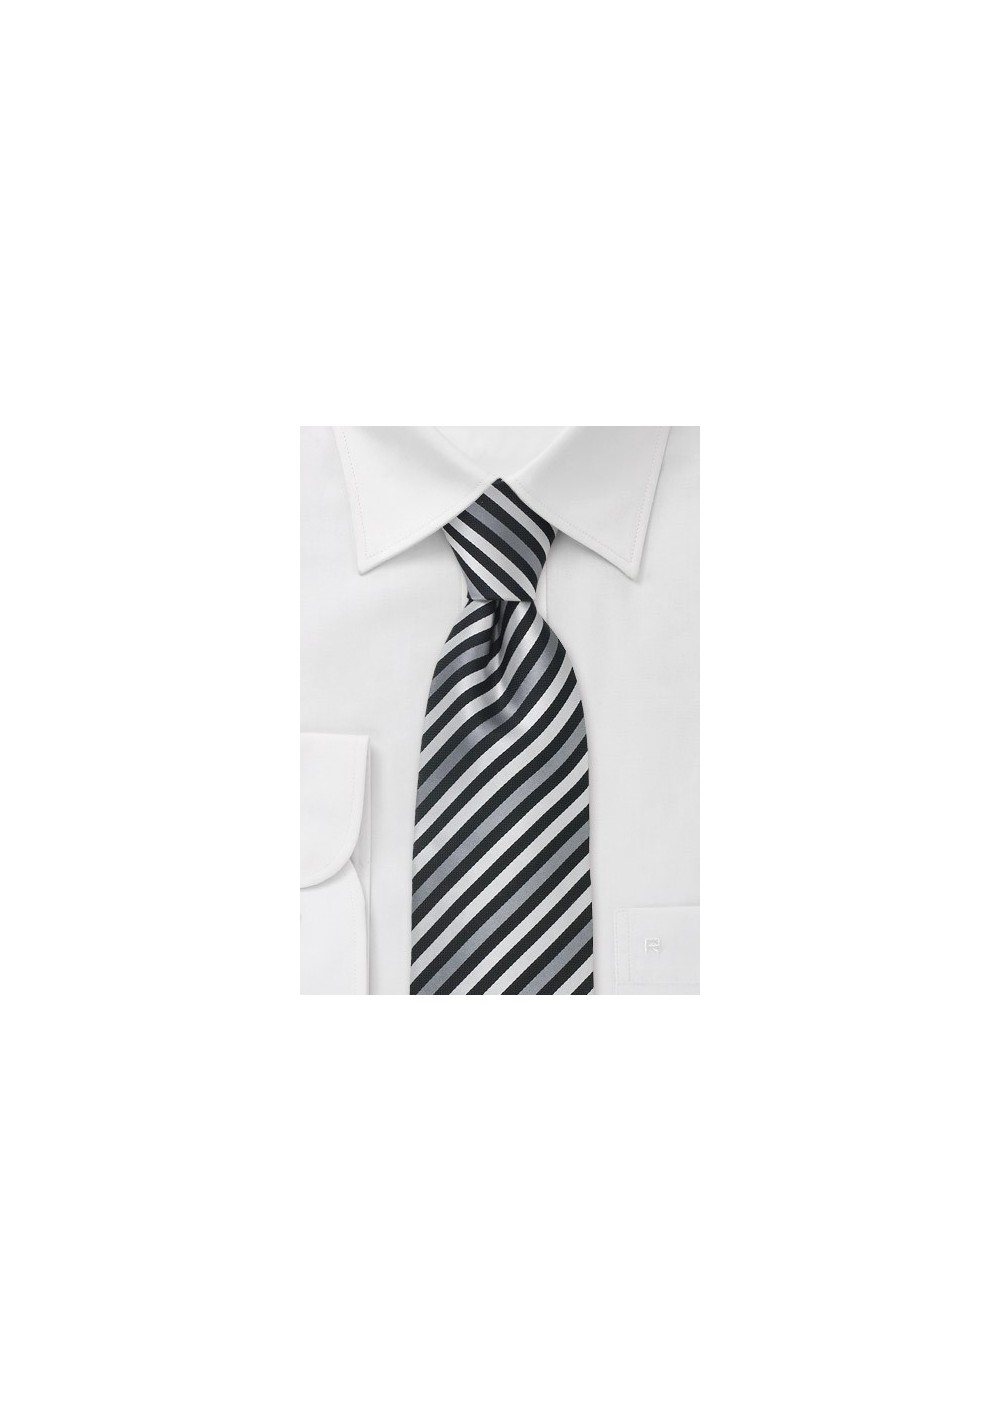 XL Length Silk Tie in White, Silver, Gray, and Black